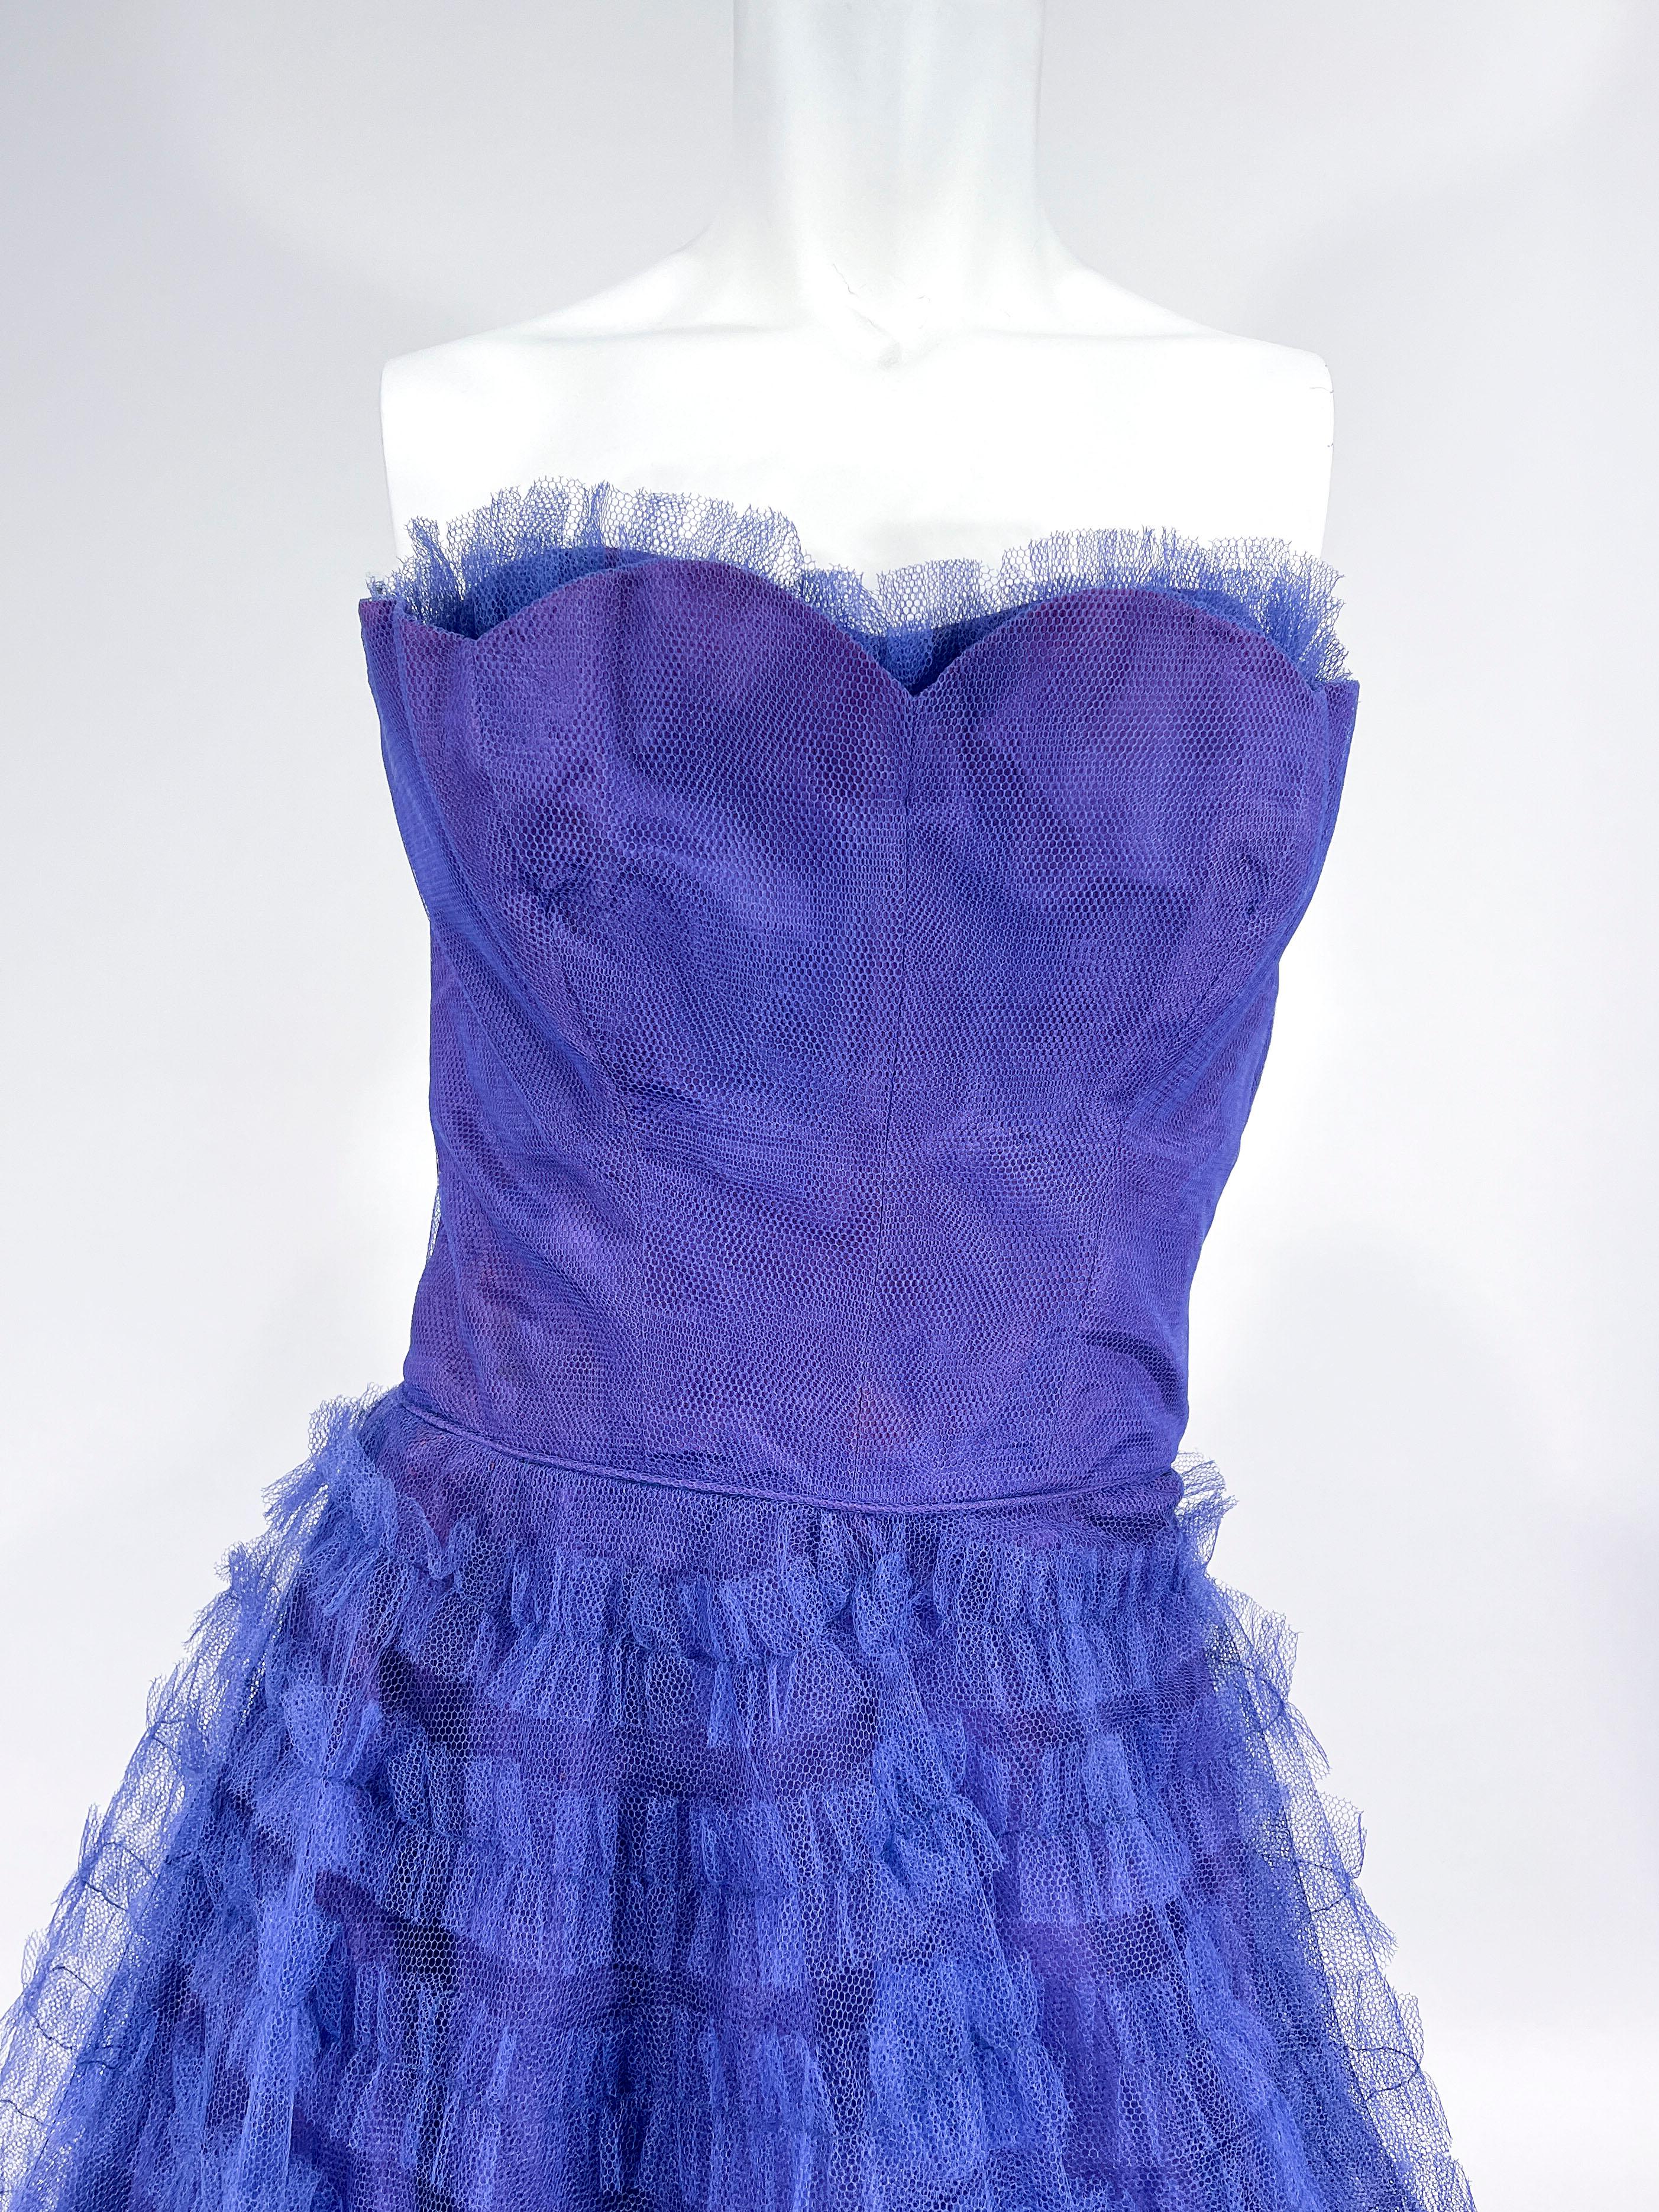 1950s velvet/purple tulle party dress featuring a strapless fitted and boned bodice that has a sweetheart neckline adorned with ruffled tulle. The full skirt has multiple tiers of ruffled tulle onto a matching tulle base. This dress is fully lined